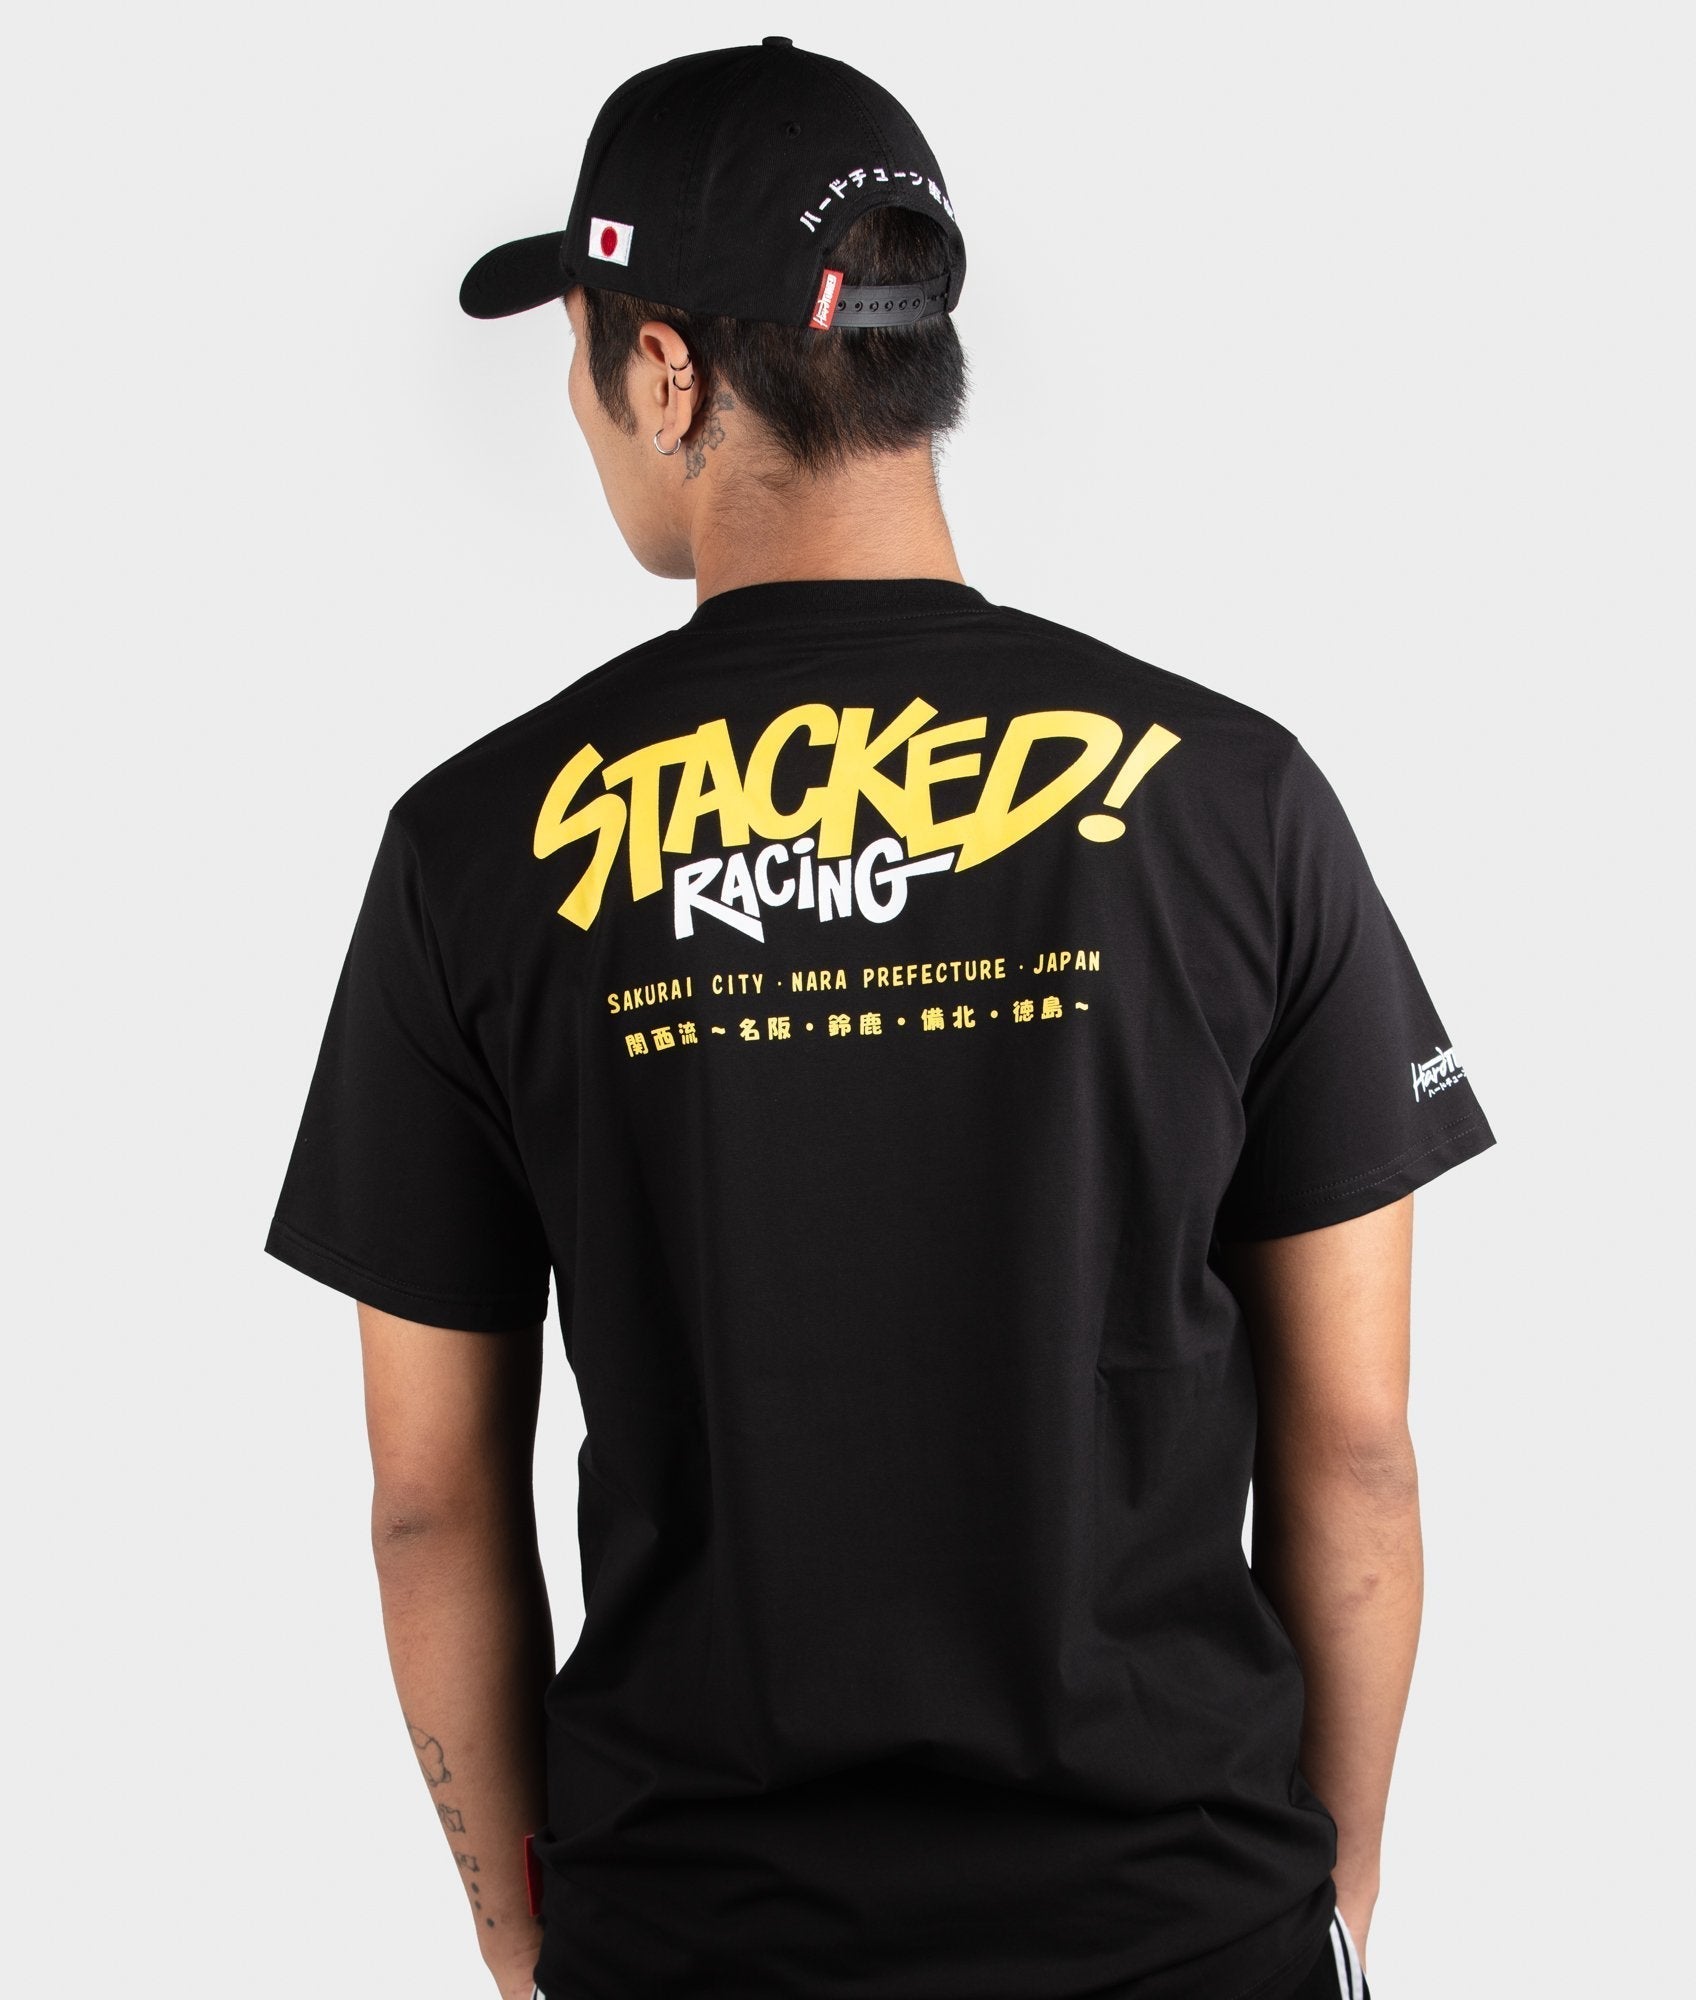 Stacked Racing Tee **LIMITED EDITION** - Hardtuned